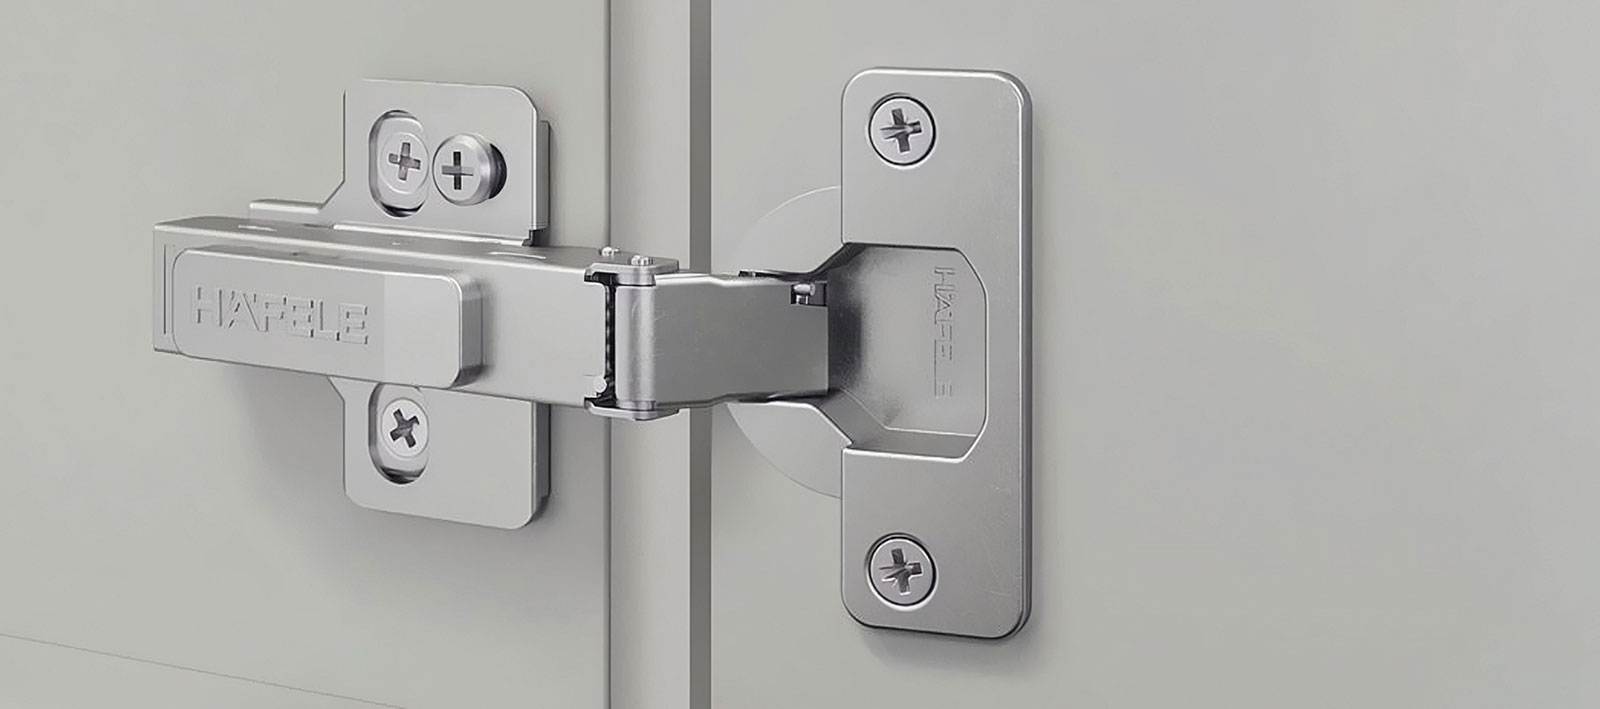 NEW Metalla Hinges - Quality hinges at the right price